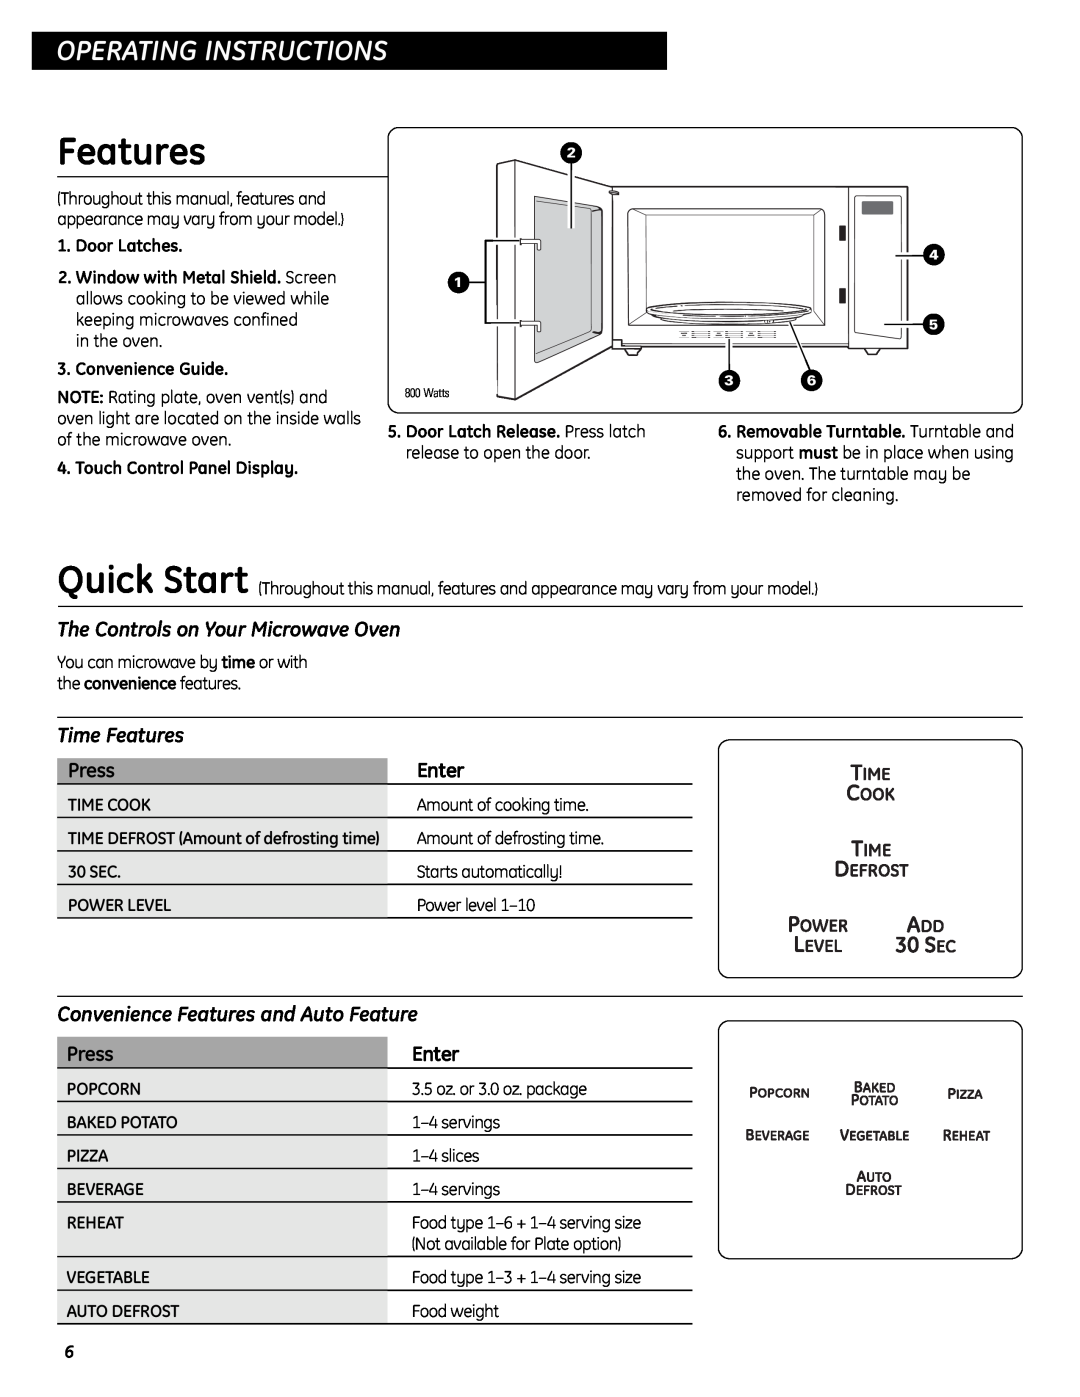 GE WES0930 Operating Instructions, The Controls on Your Microwave Oven, Time Features, Enter, Press, Door Latches 